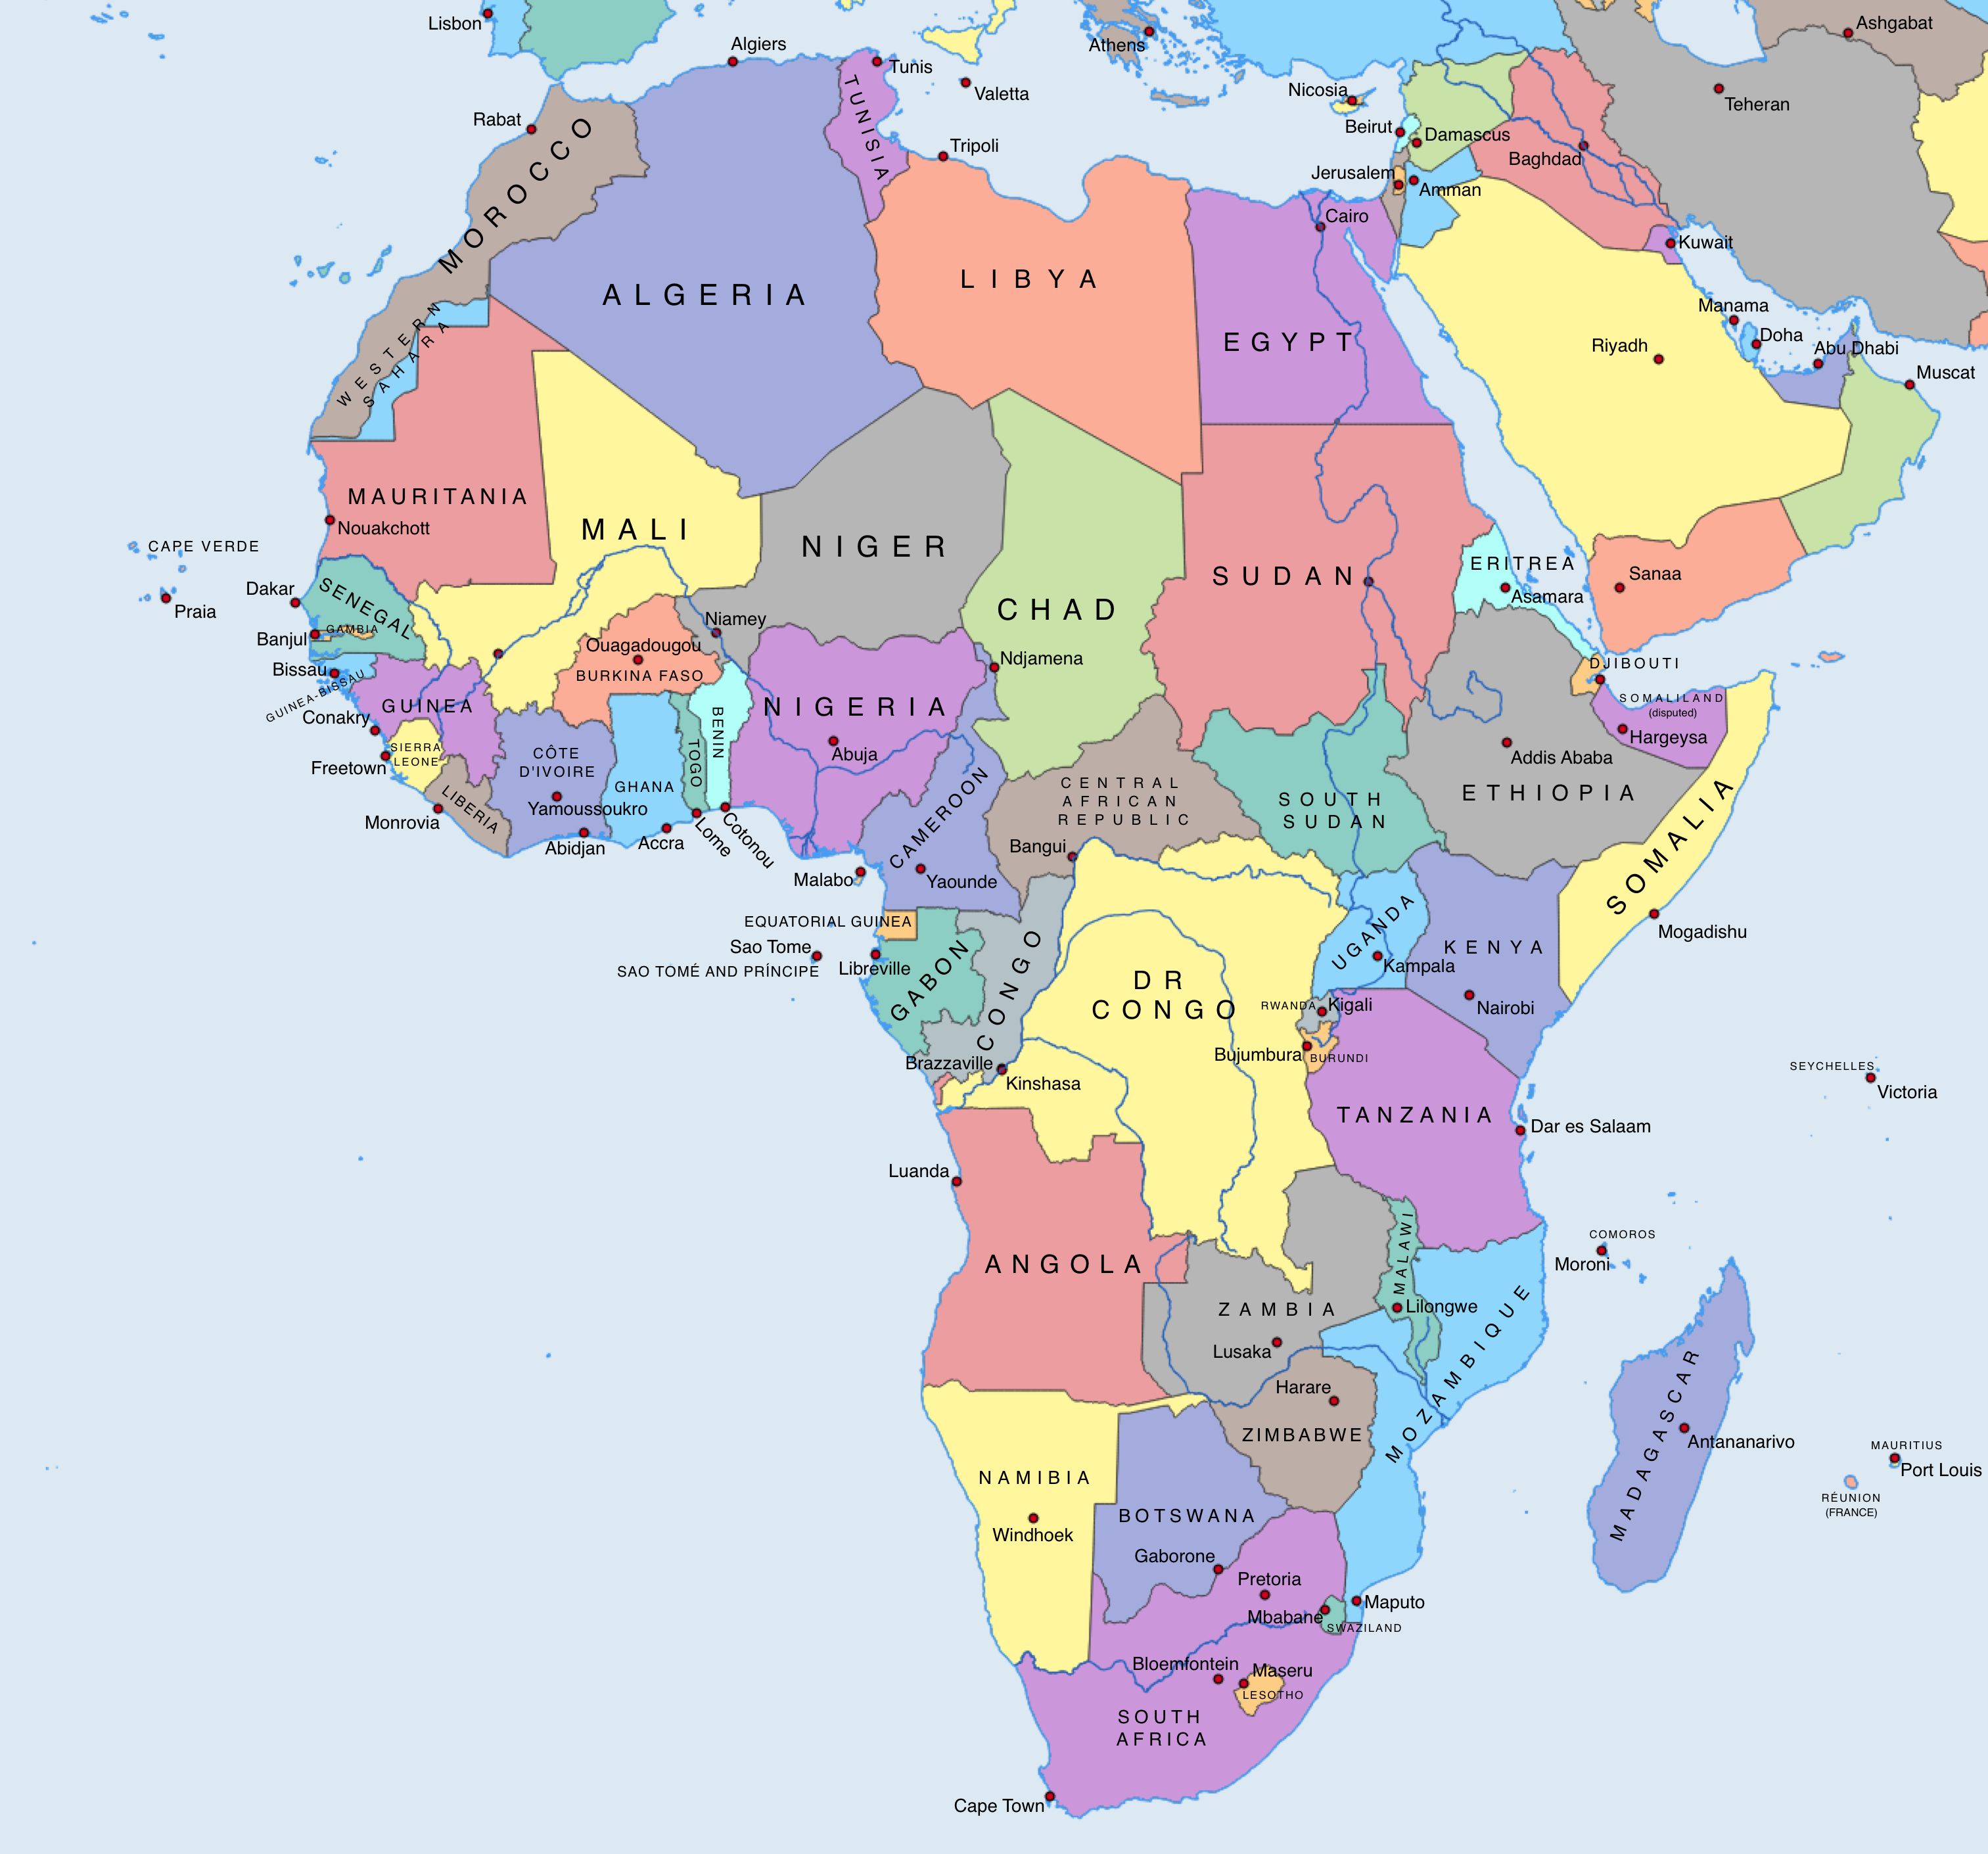 Free Maps of Africa | Mapswire